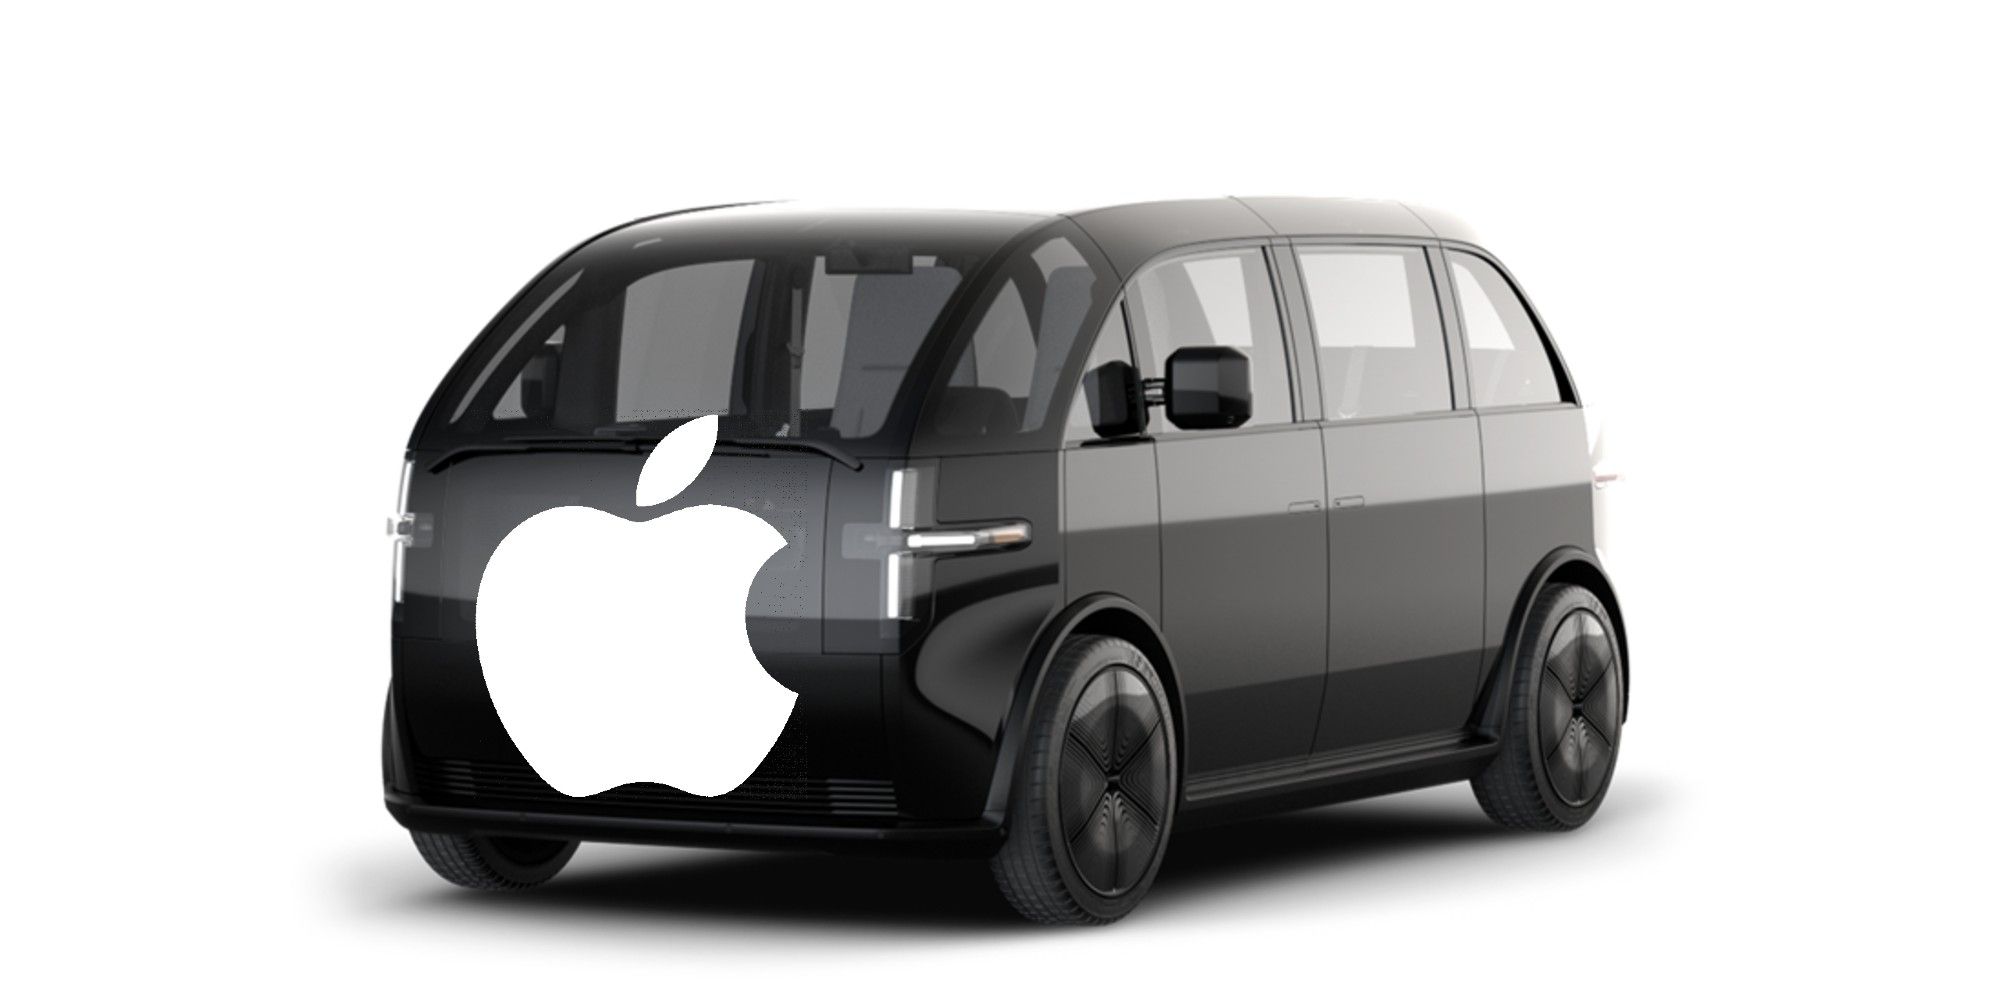 Apple Reportedly Considered Canoo Purchase To Help With Car Ambitions